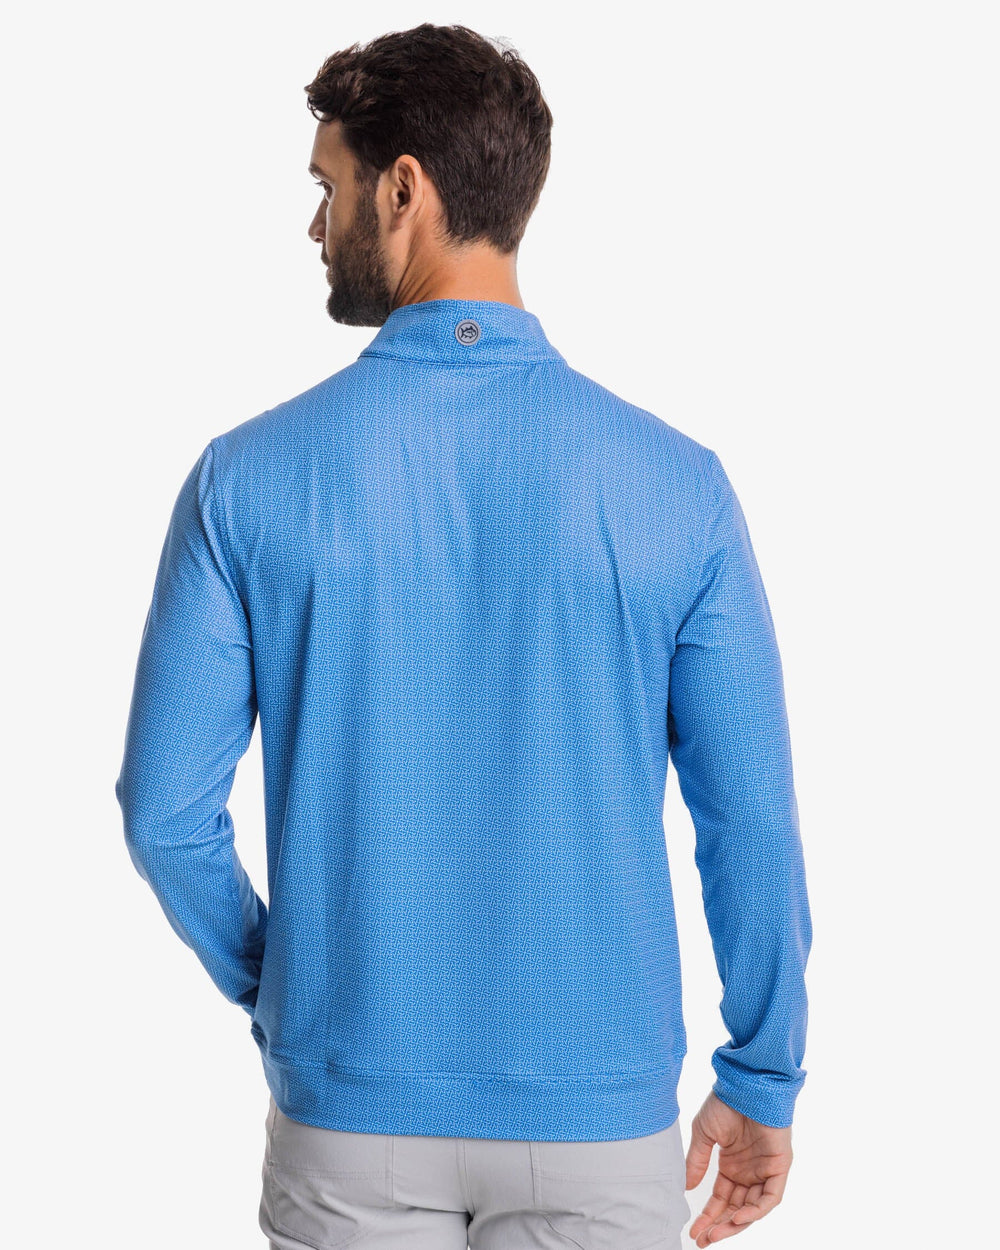 The back view of the Southern Tide Pine Ridge Print Cruiser Quarter Zip Pullover by Southern Tide - Atlantic Blue